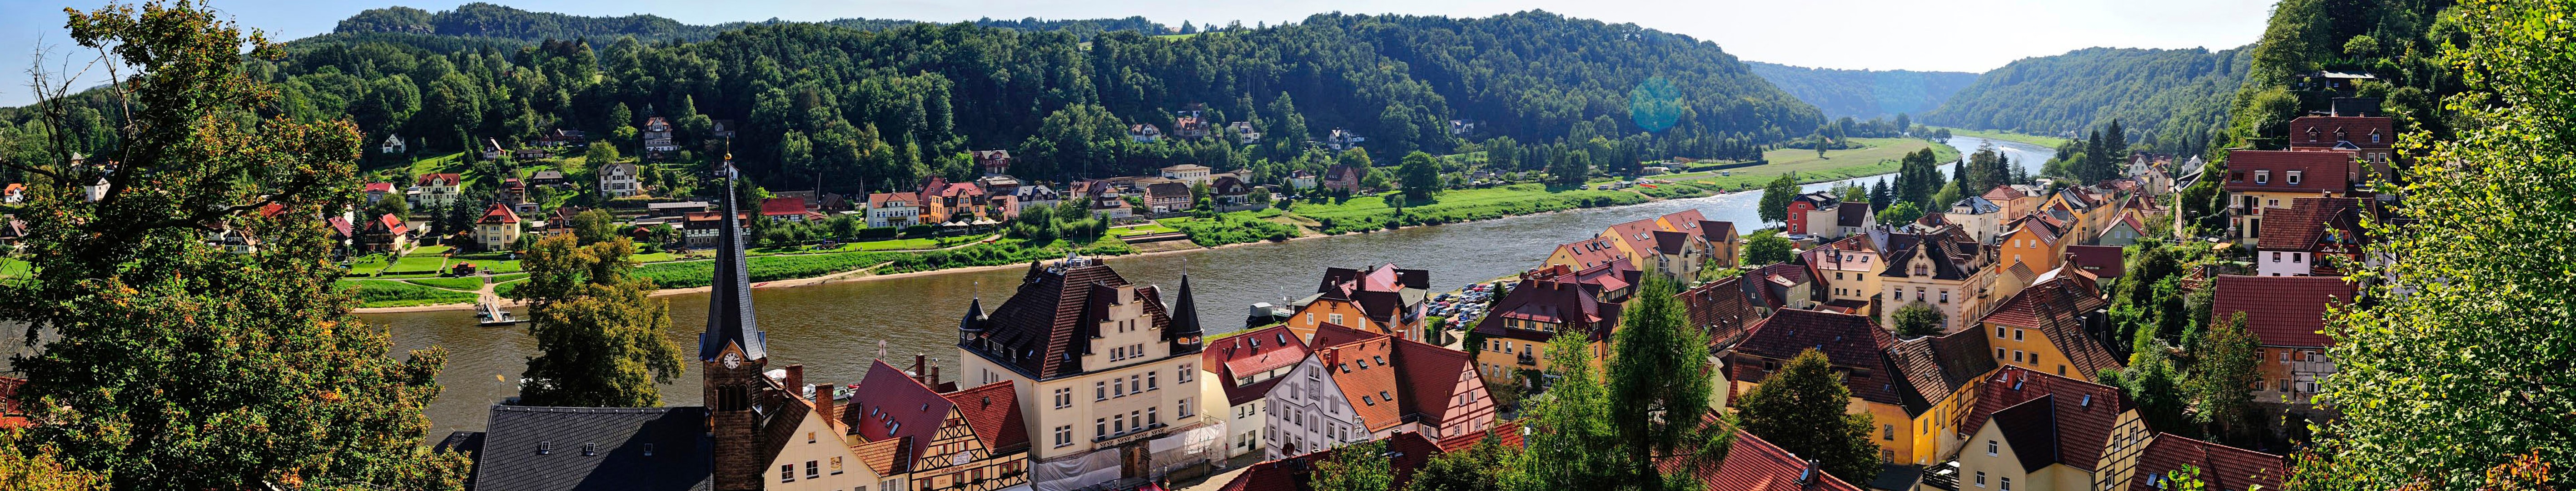 germany, europe, photography, panorama, hill, mountain, river, town, tree